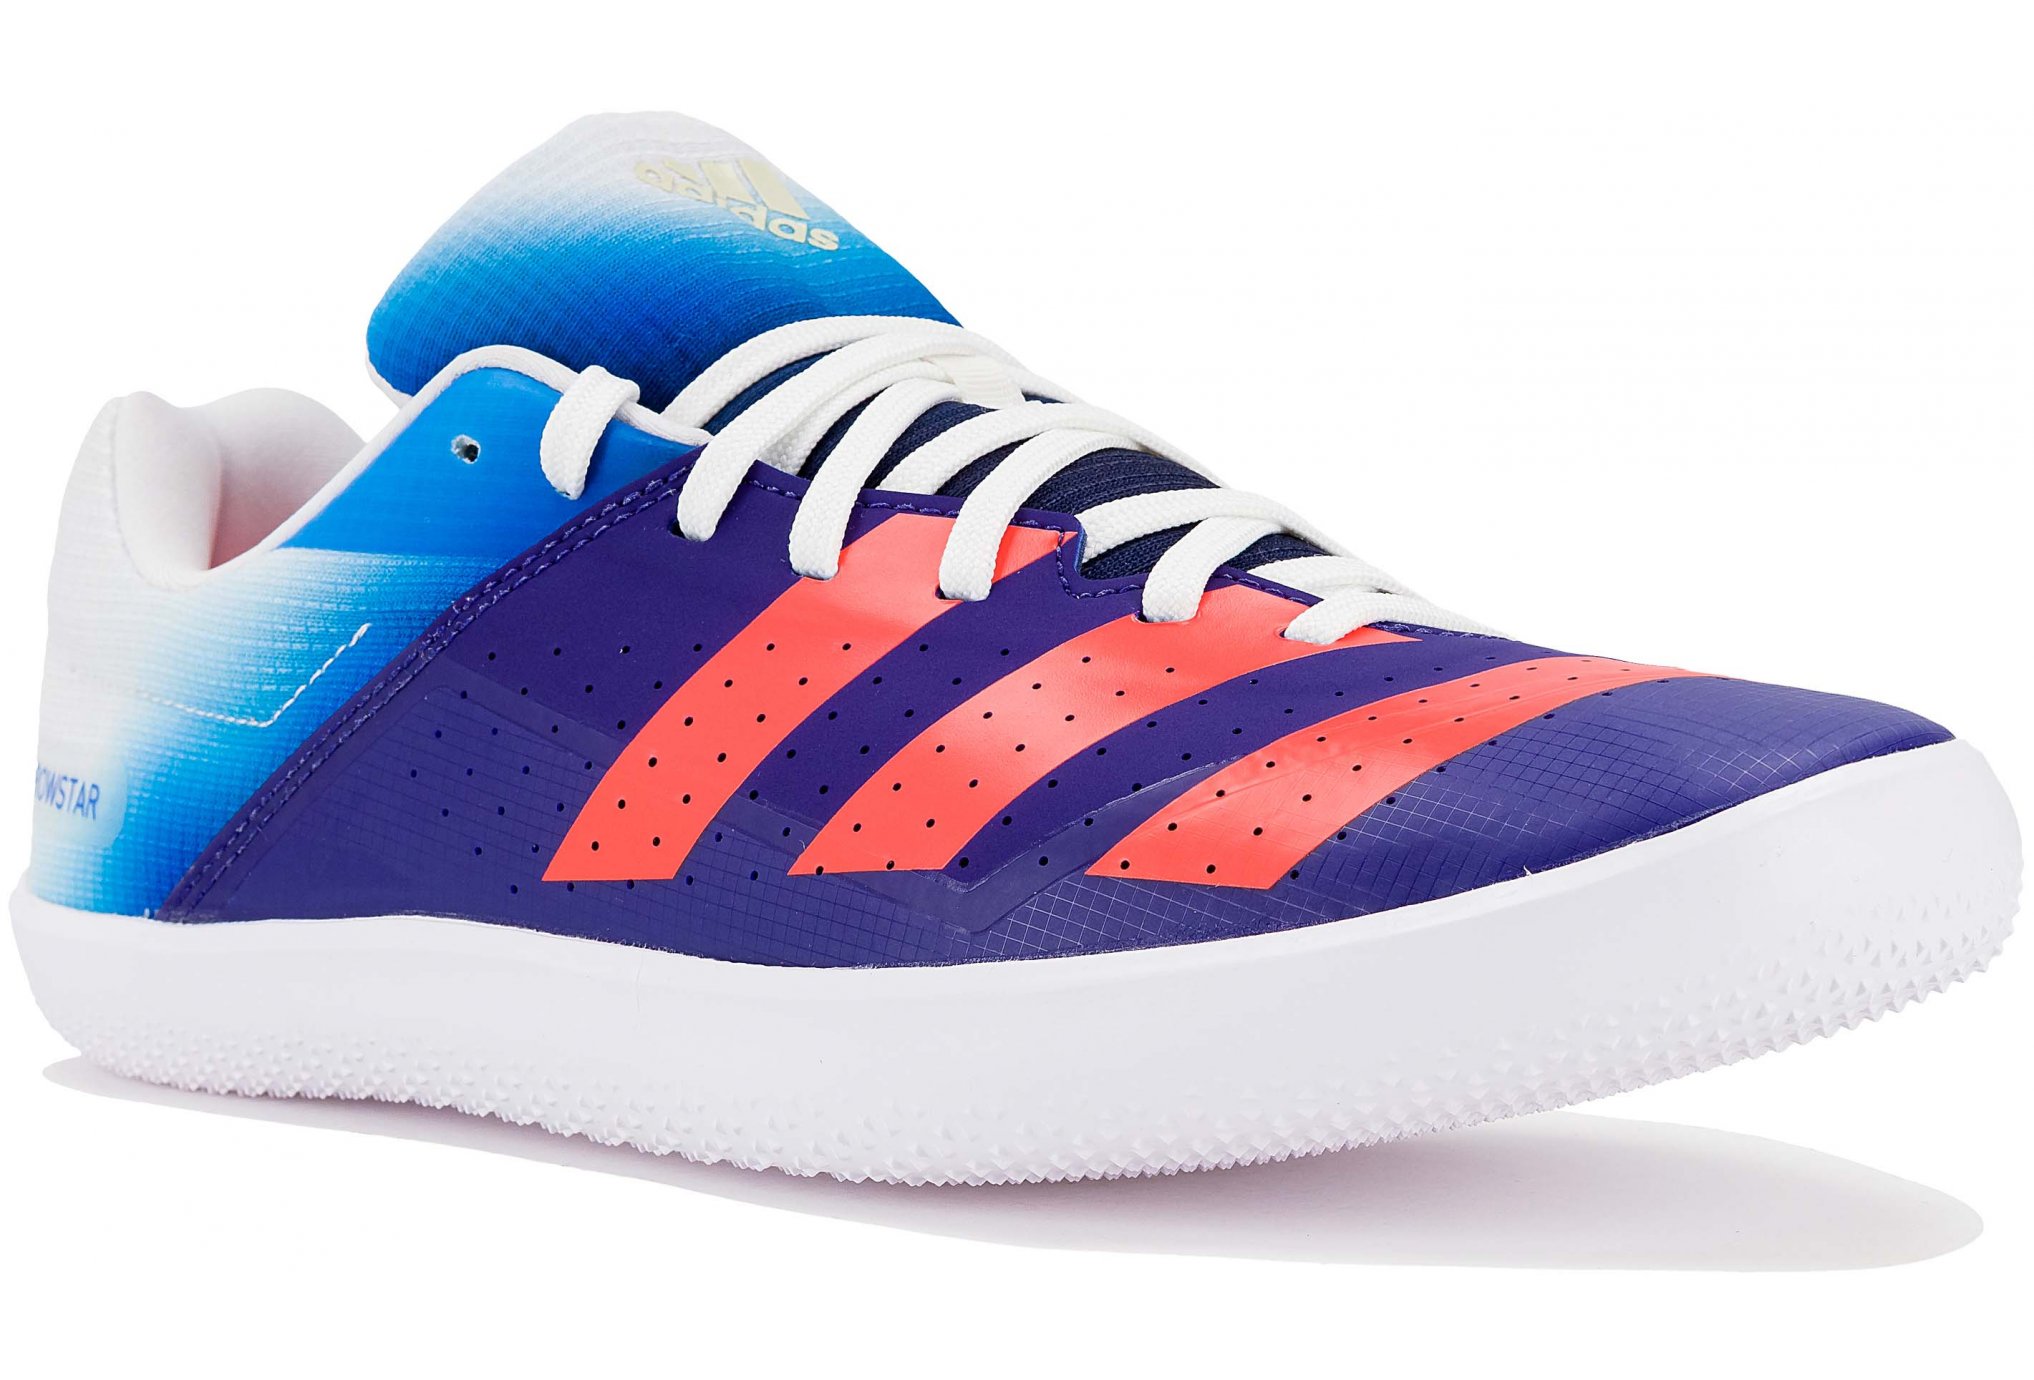 adidas Throwstar M Chaussures homme